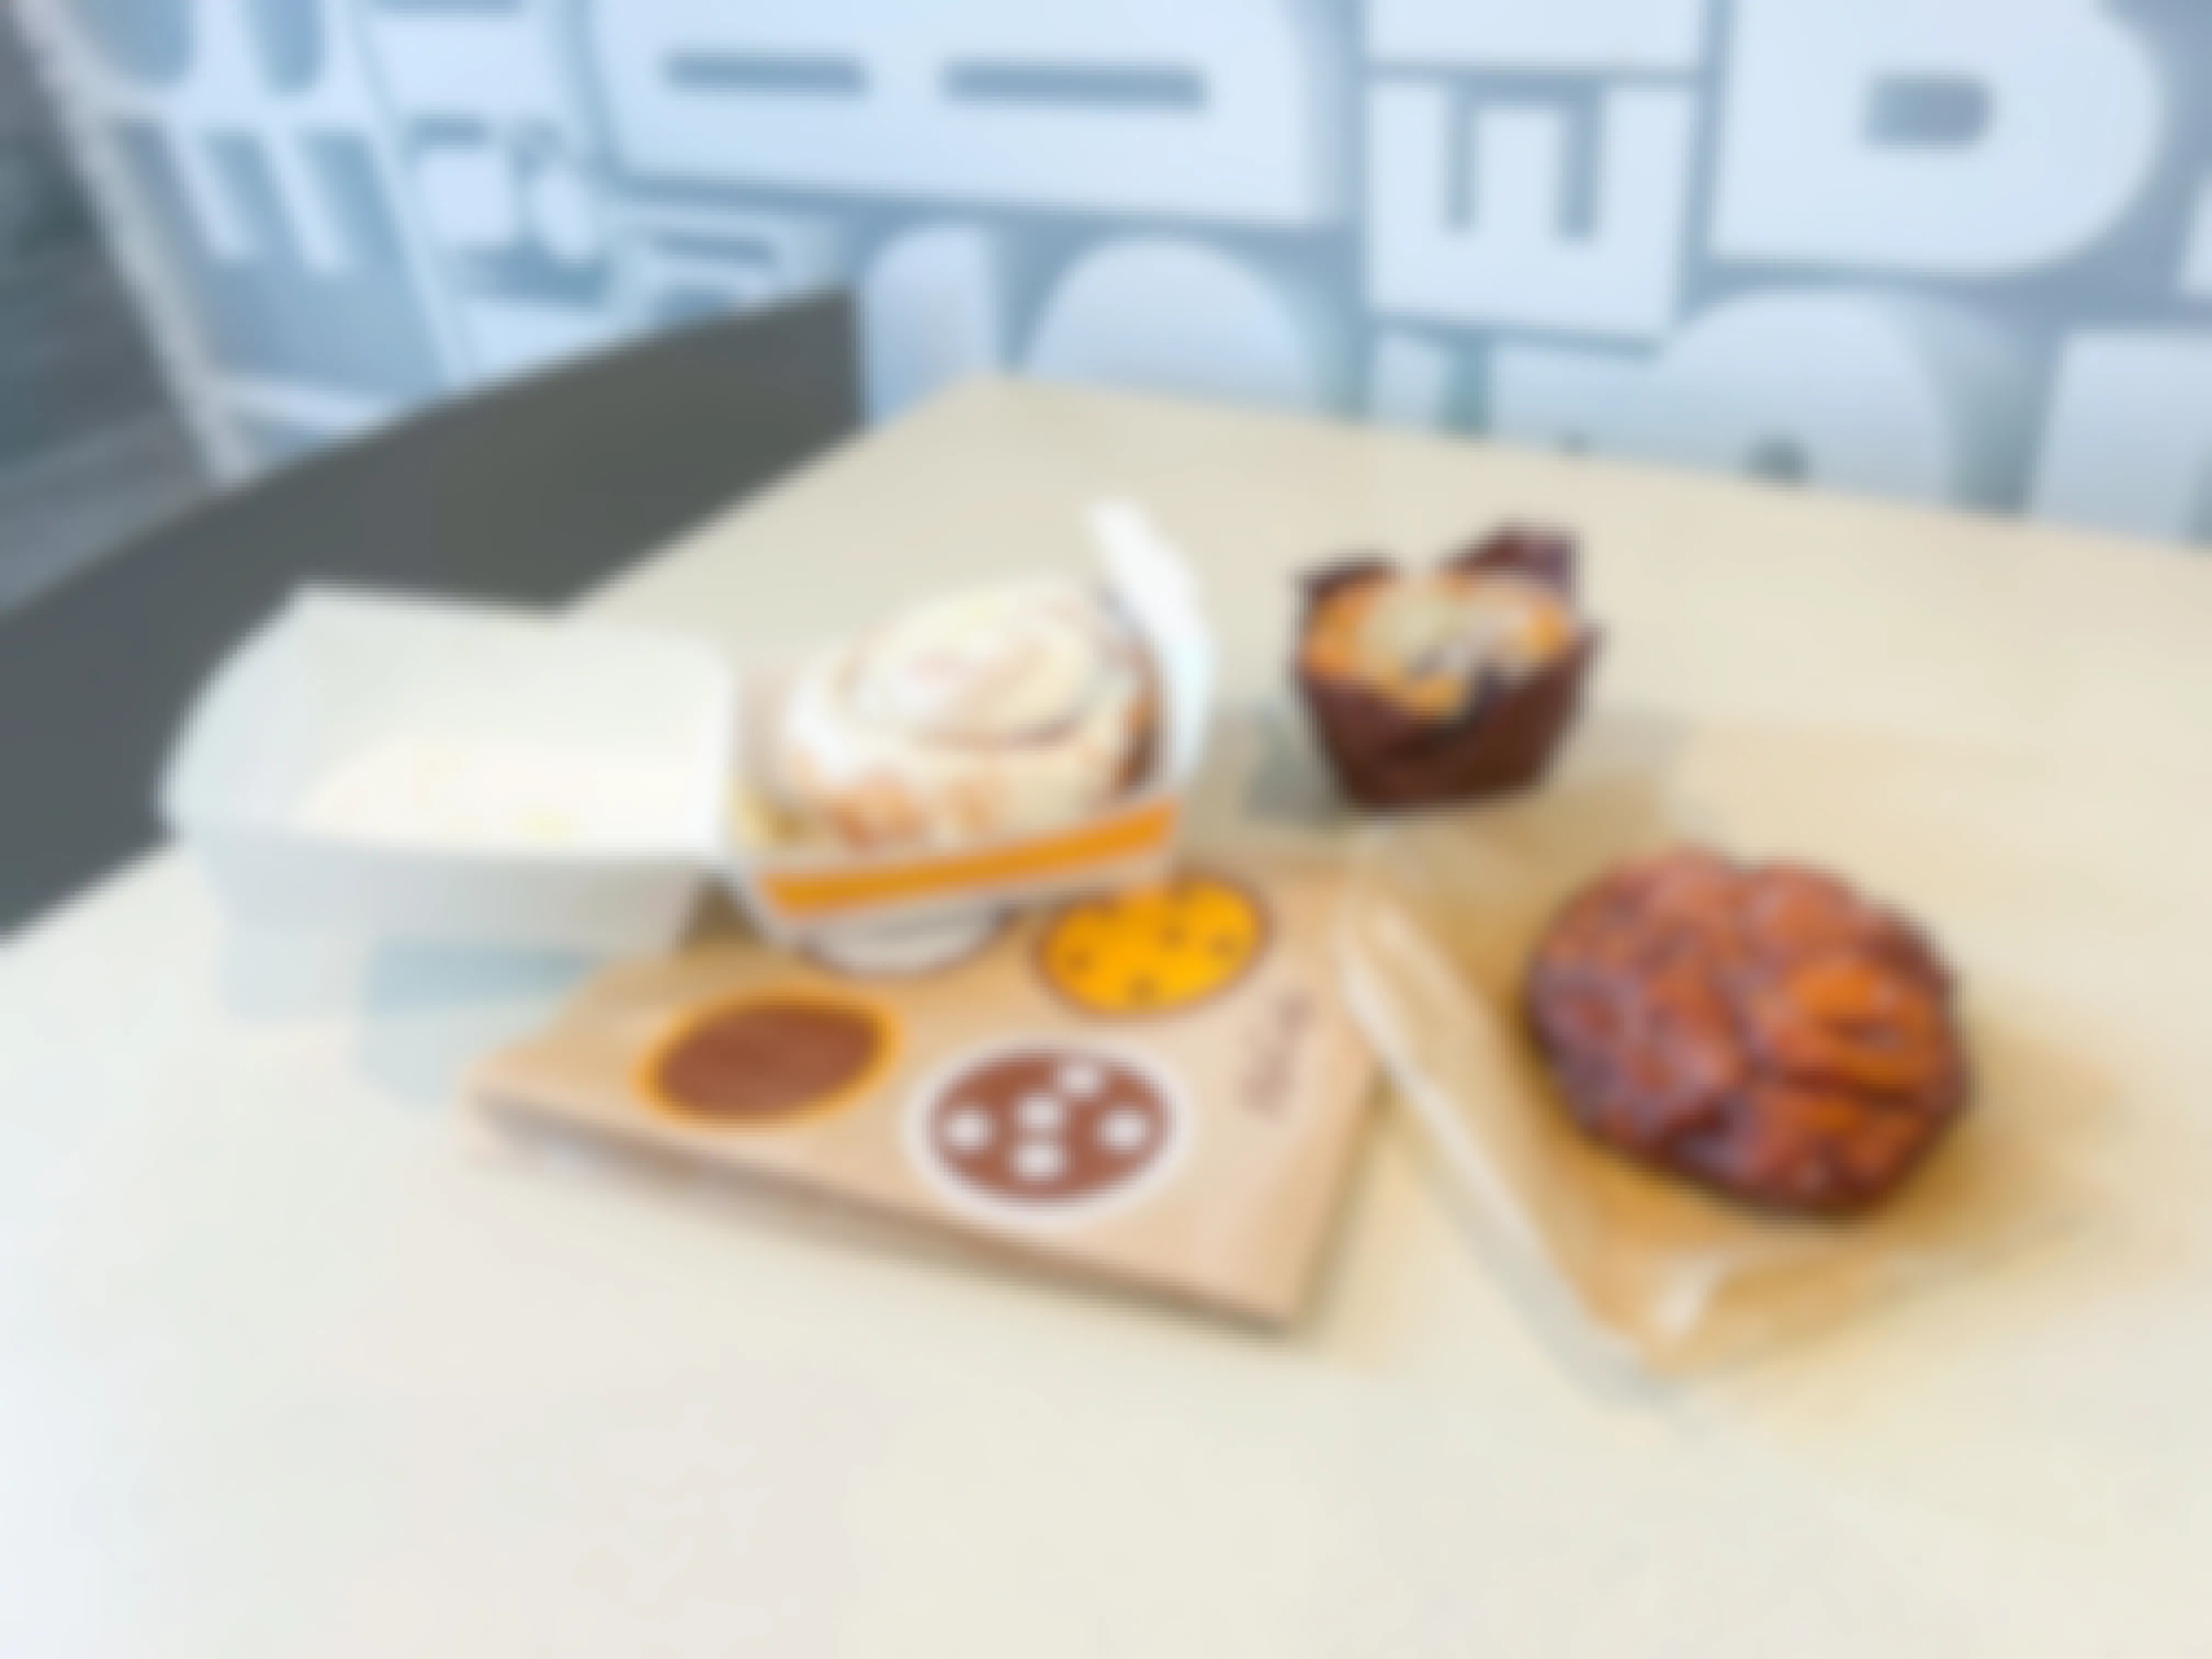 Mcdonalds bakery items, cinnamon roll with icing, blueberry muffin and an apple fritter